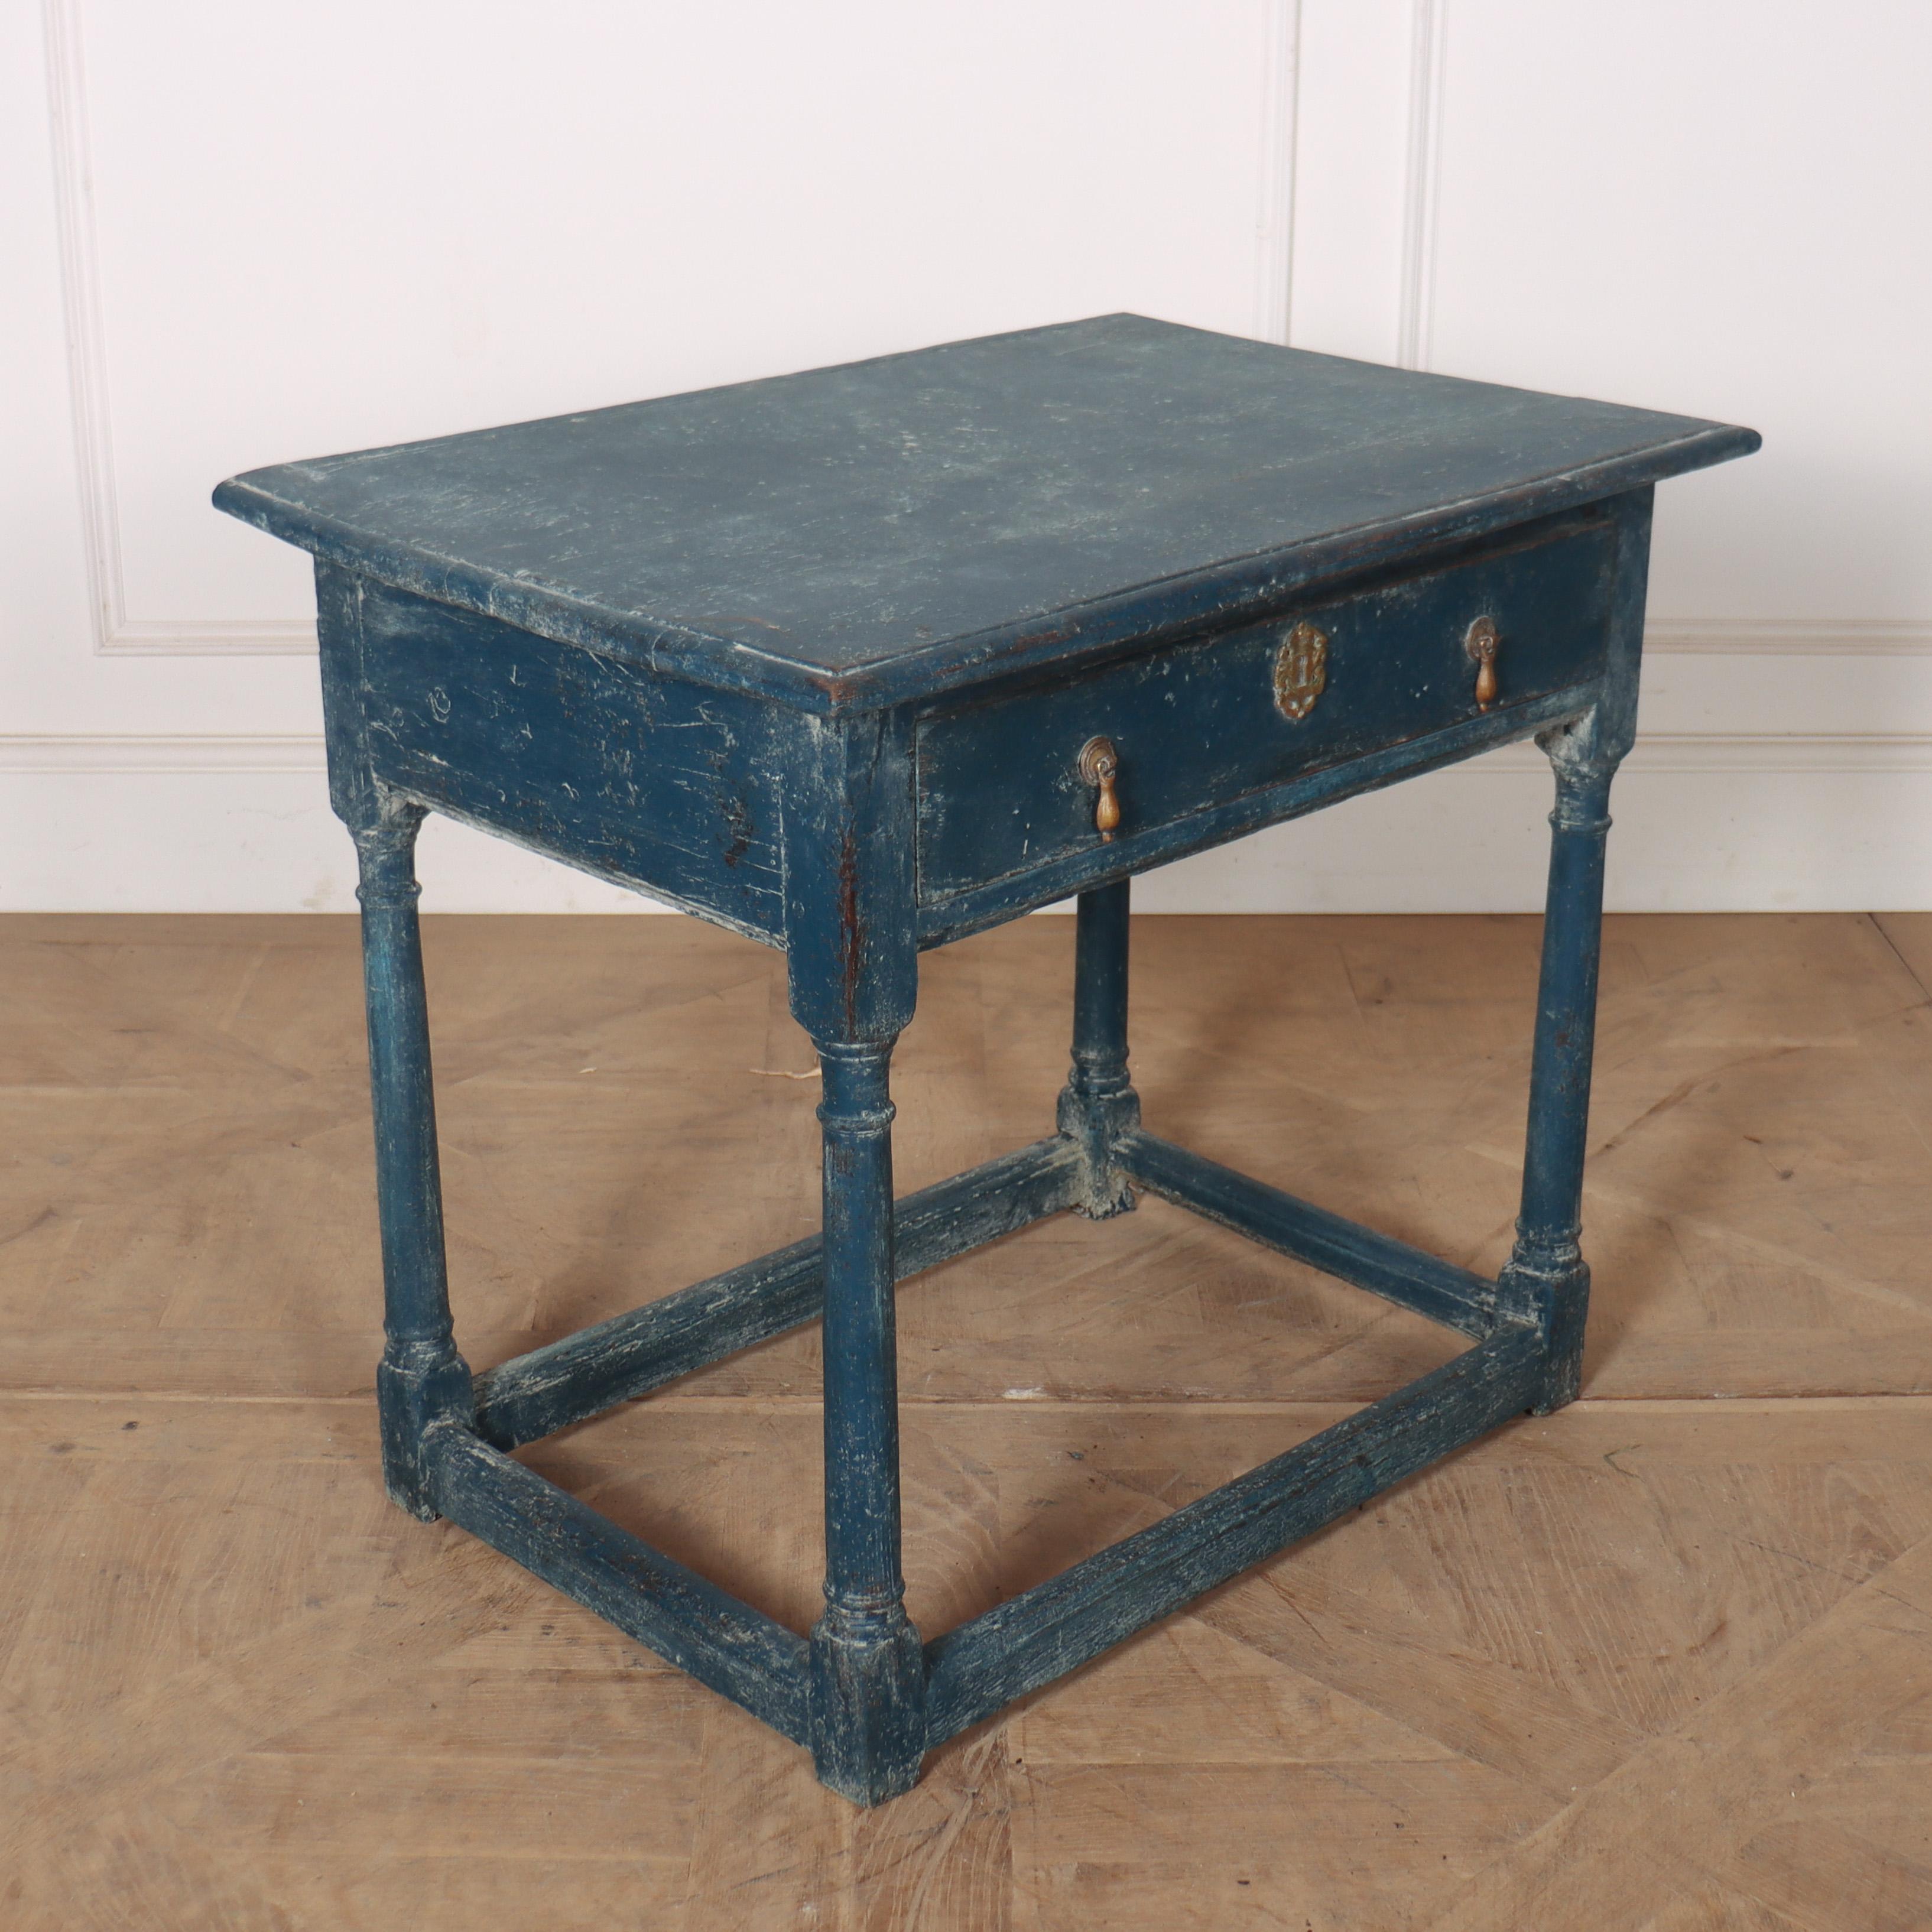 Early 18th C English painted oak one drawer lamp table. 1760.

Reference: 8158

Dimensions
30 inches (76 cms) Wide
21 inches (53 cms) Deep
26.5 inches (67 cms) High